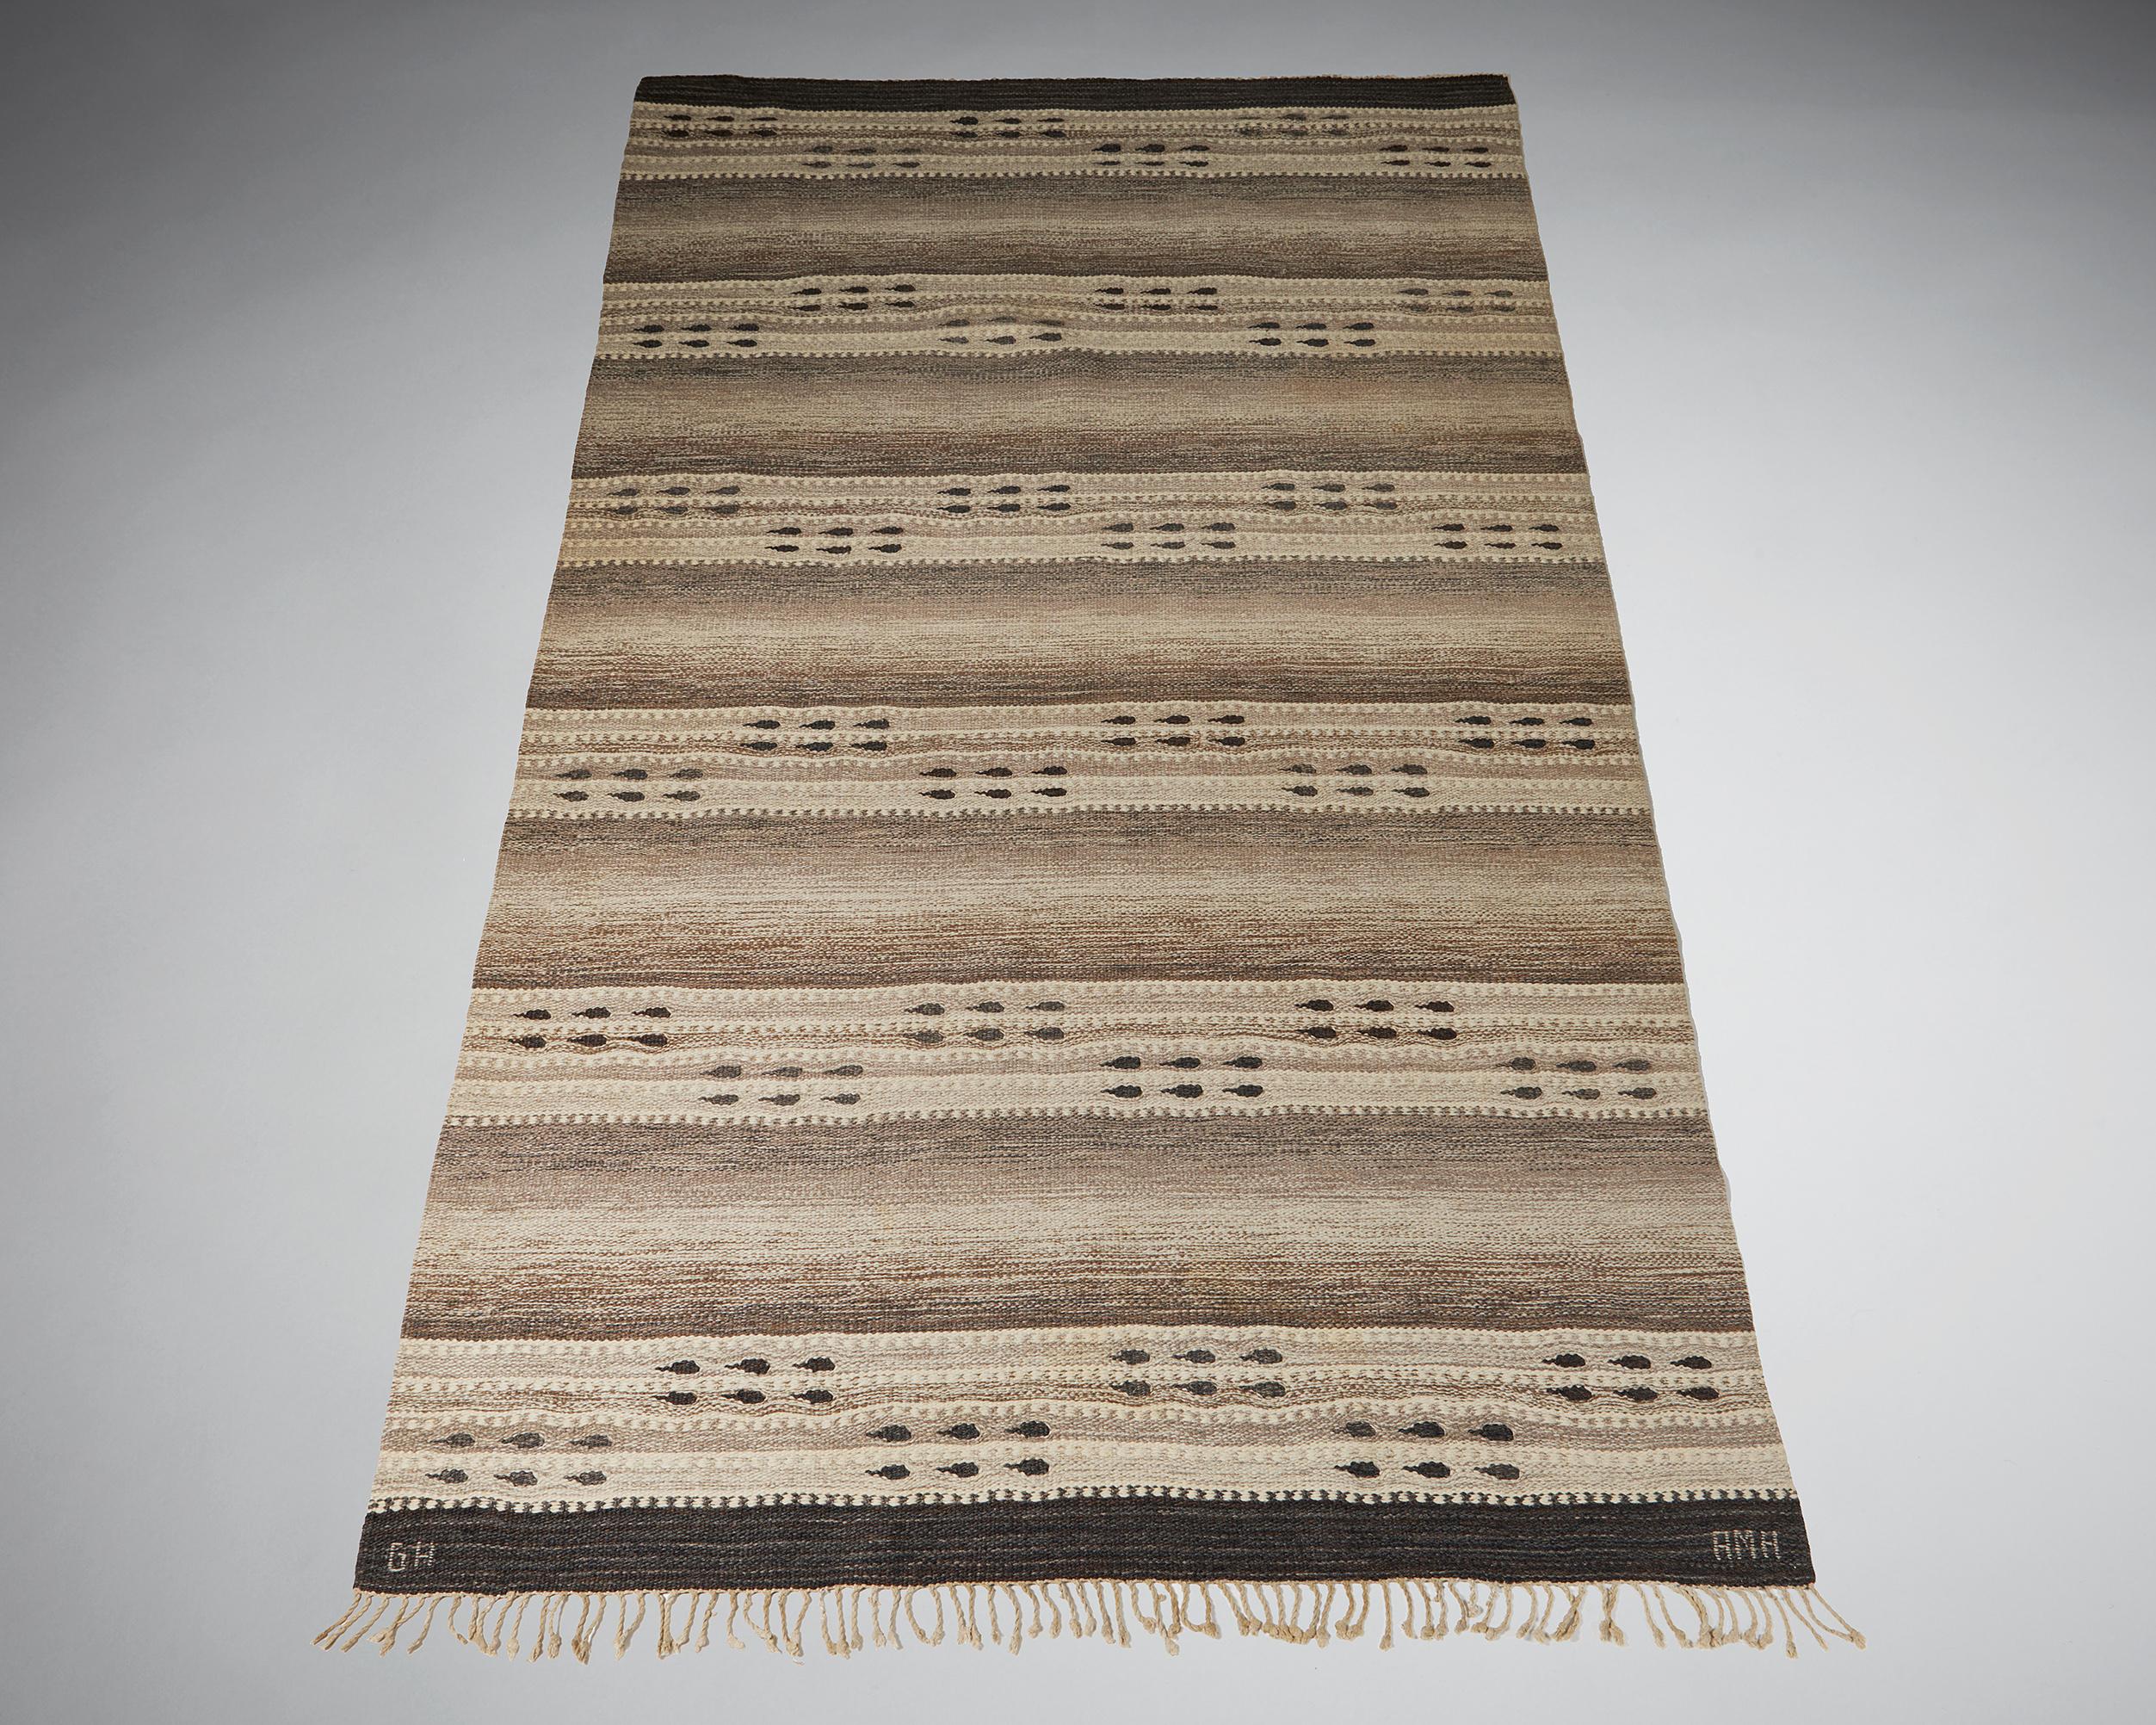 Rug designed by Anna Maria Hoke,
Sweden. 1950.
Handwoven flatweave in wool.

Signed.

Measures: L: 290 cm / 9' 6